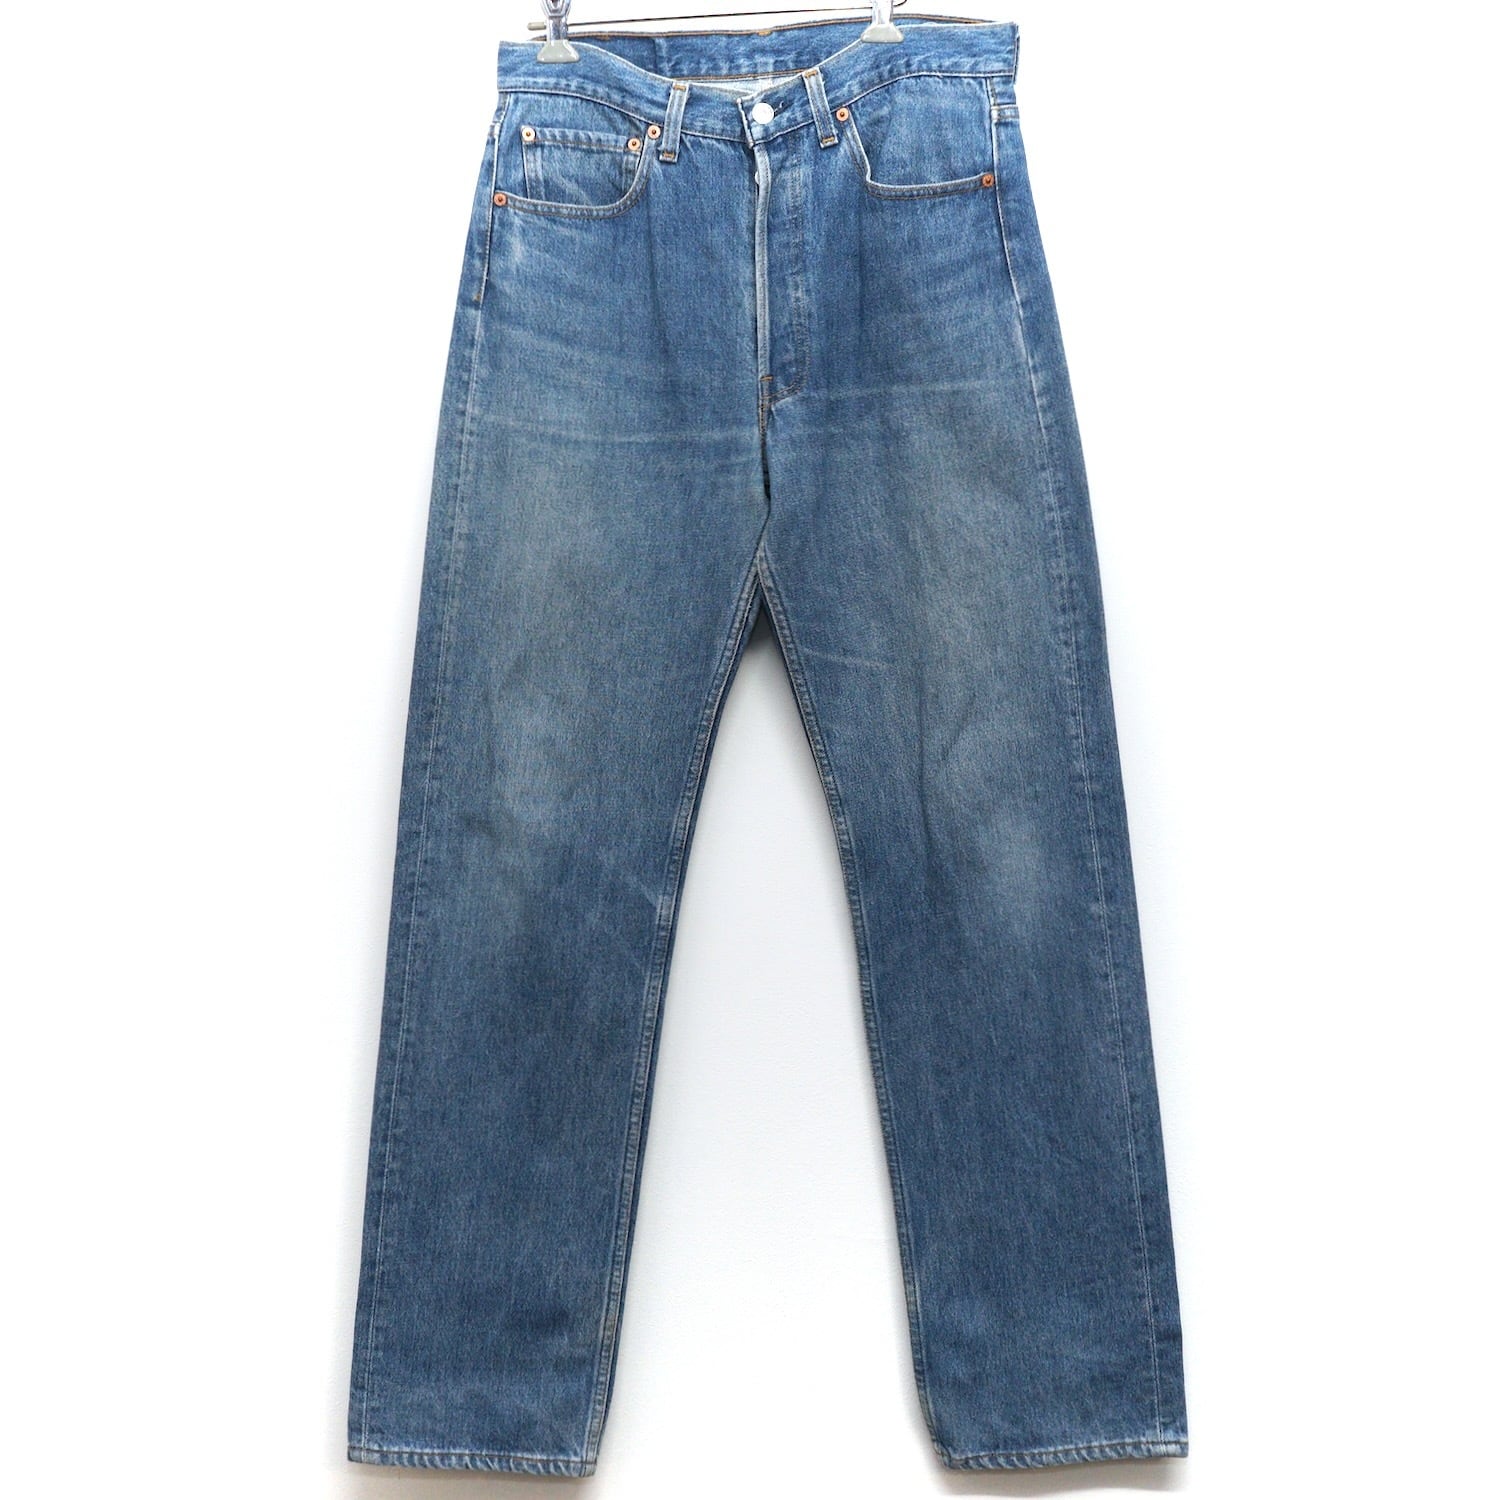 2787 Levi's リーバイス 501-0000 92年 米国製 Made in U.S.A. 赤文字